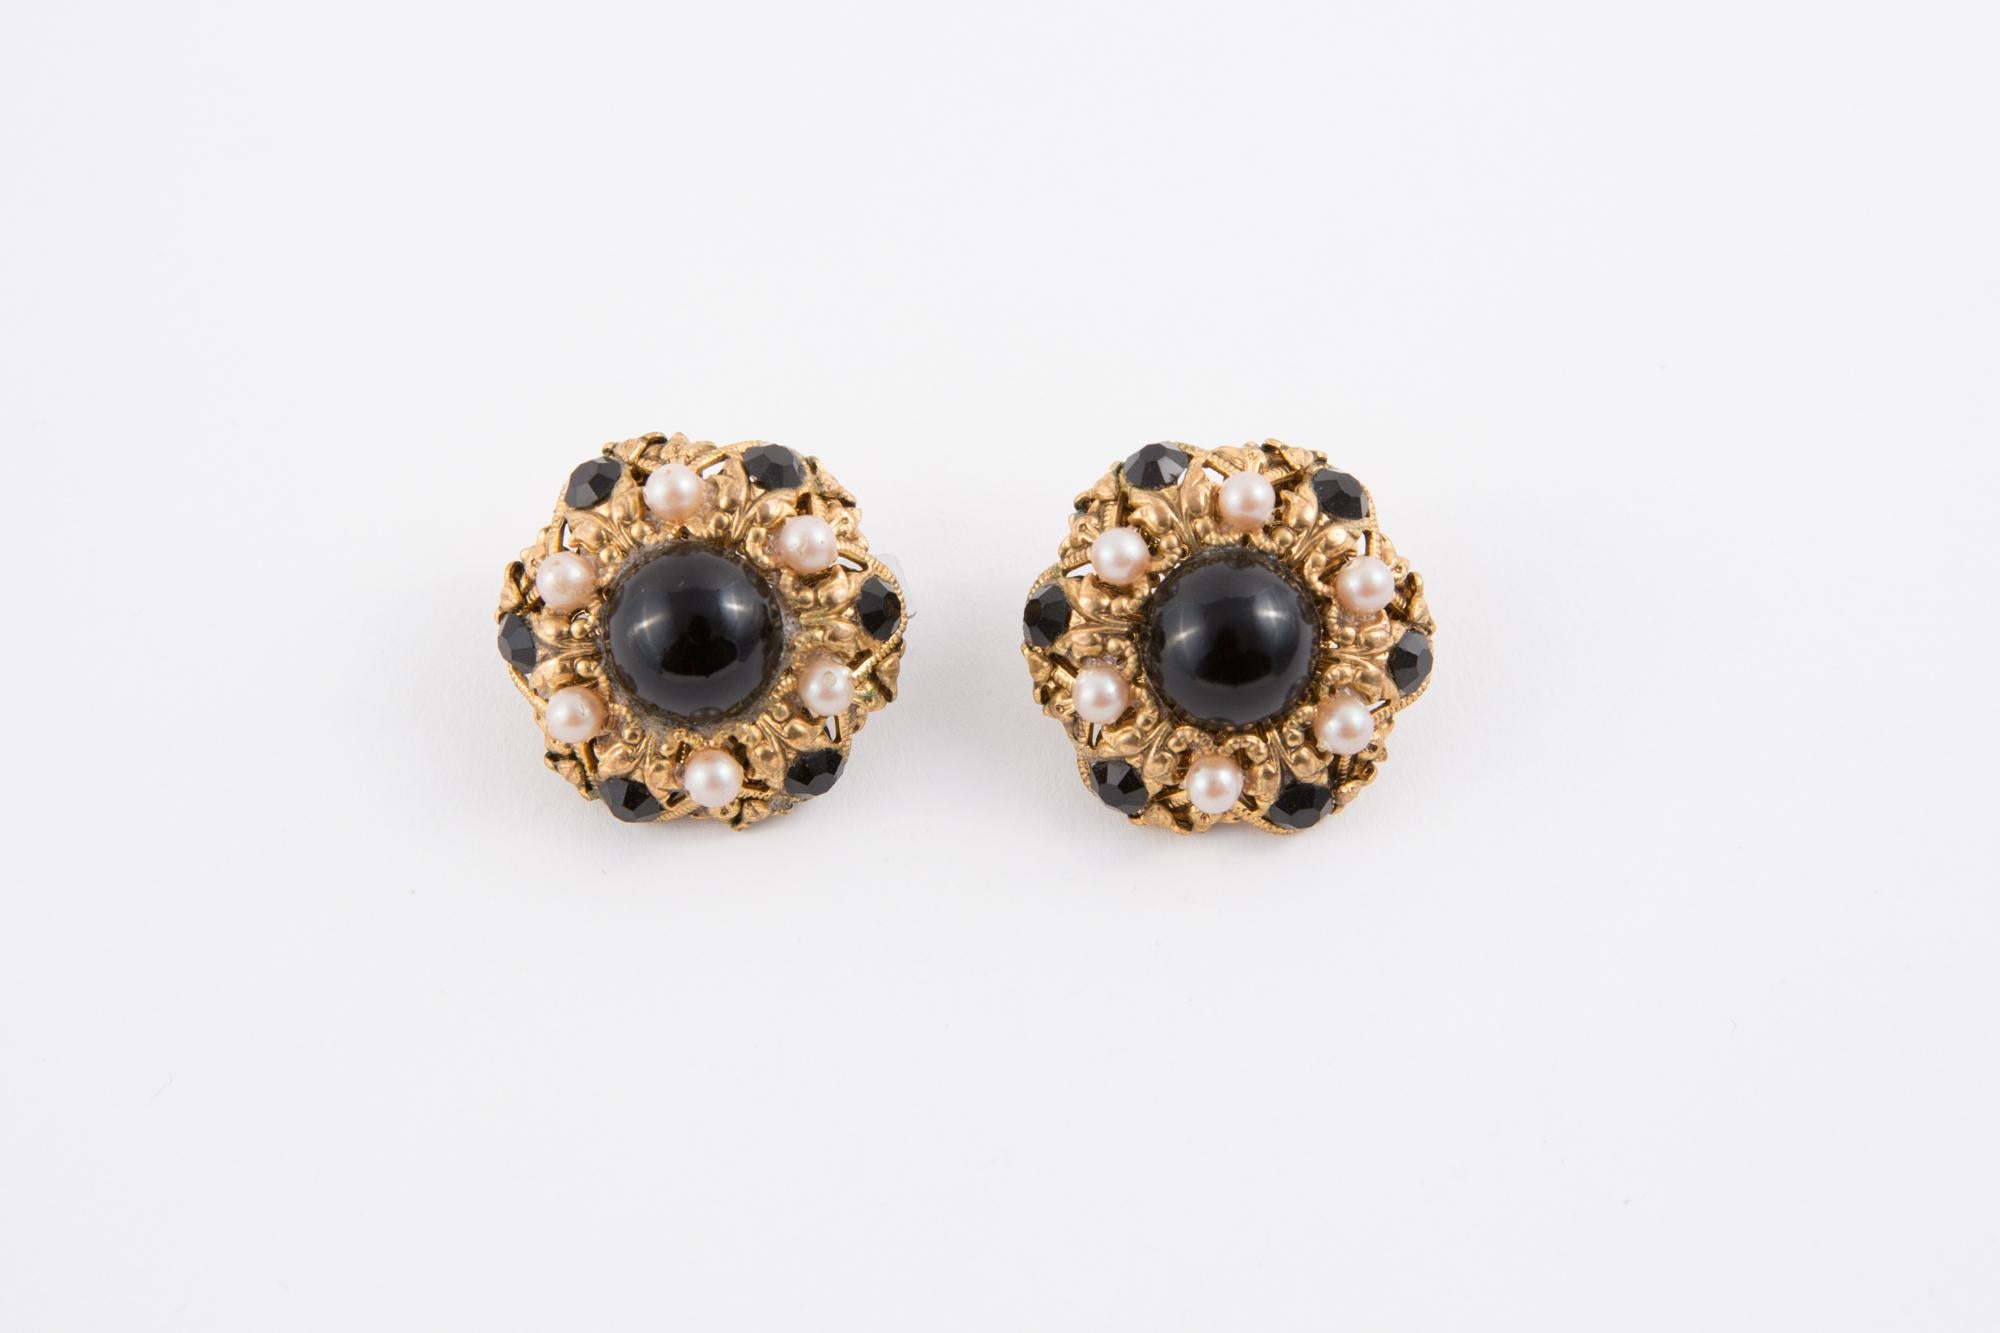 1960s black, faux pearls and gold tone clip on earrings featuring beads, a back clip fastening.  
In good vintage condition  Made in France. 
These earrings come as a pair. 
Width diameter: 1.18in. (3cm) 
We guarantee you will receive this gorgeous